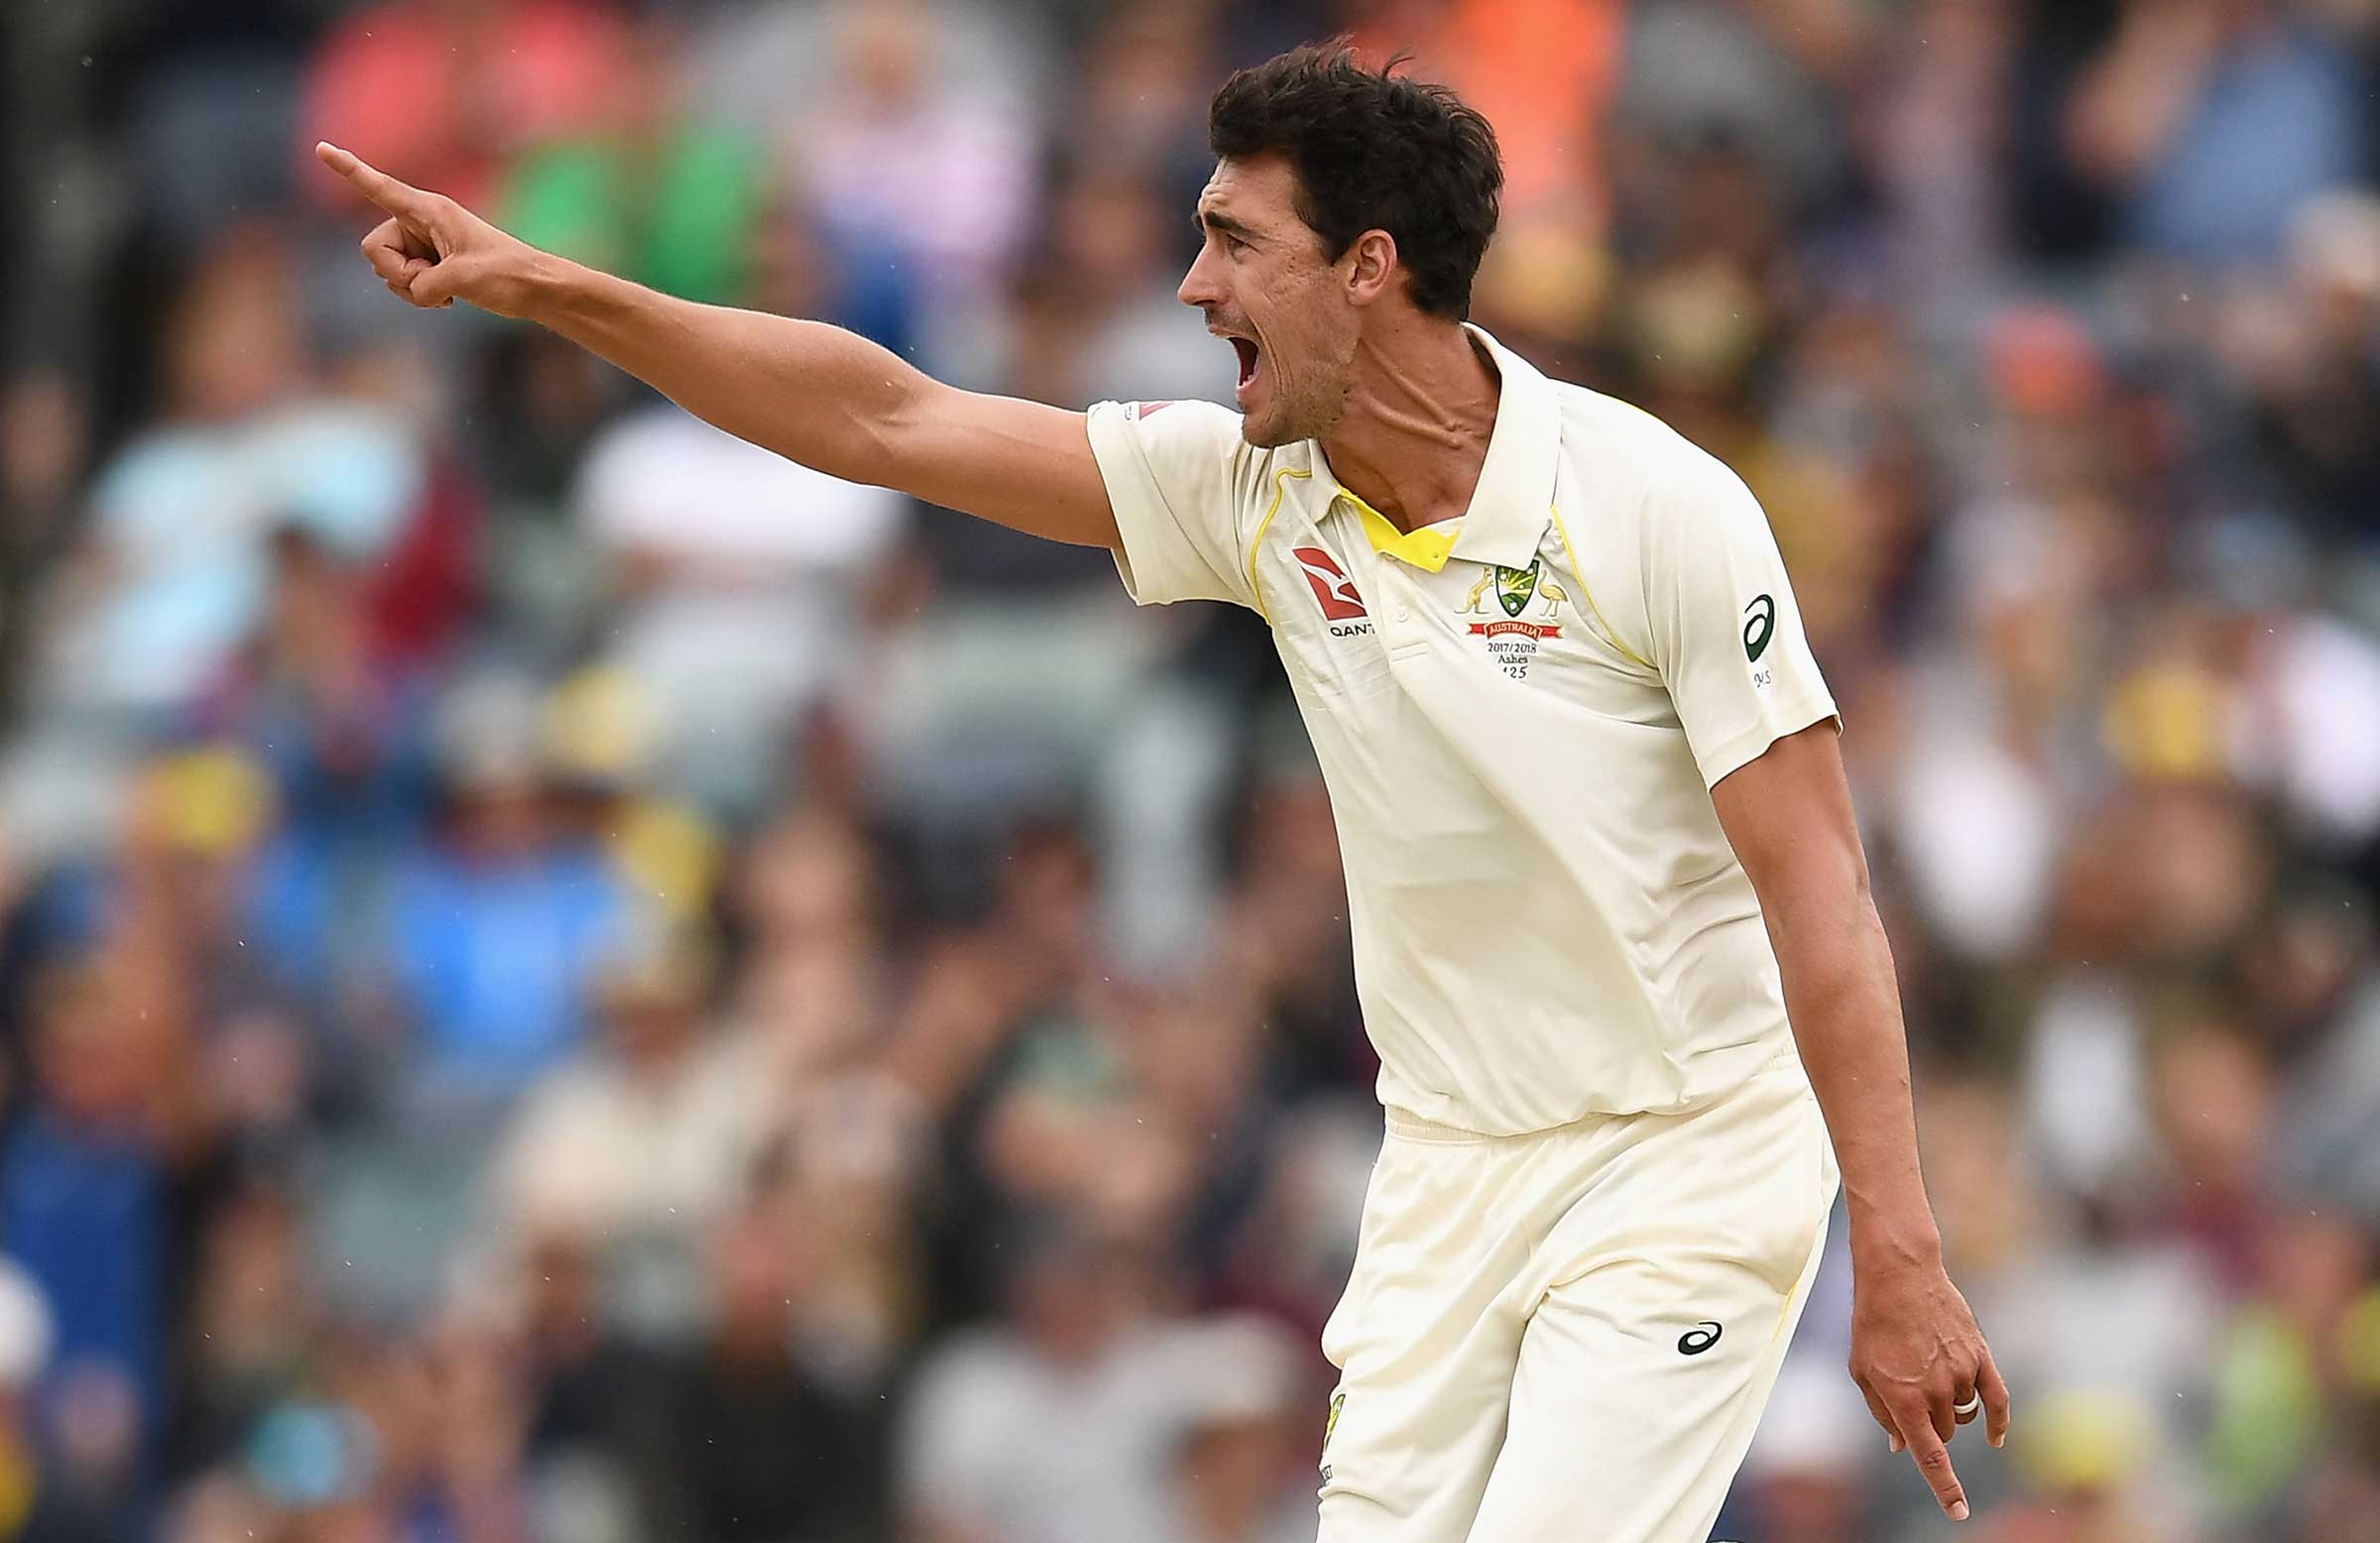 Starc-unplayable delivery